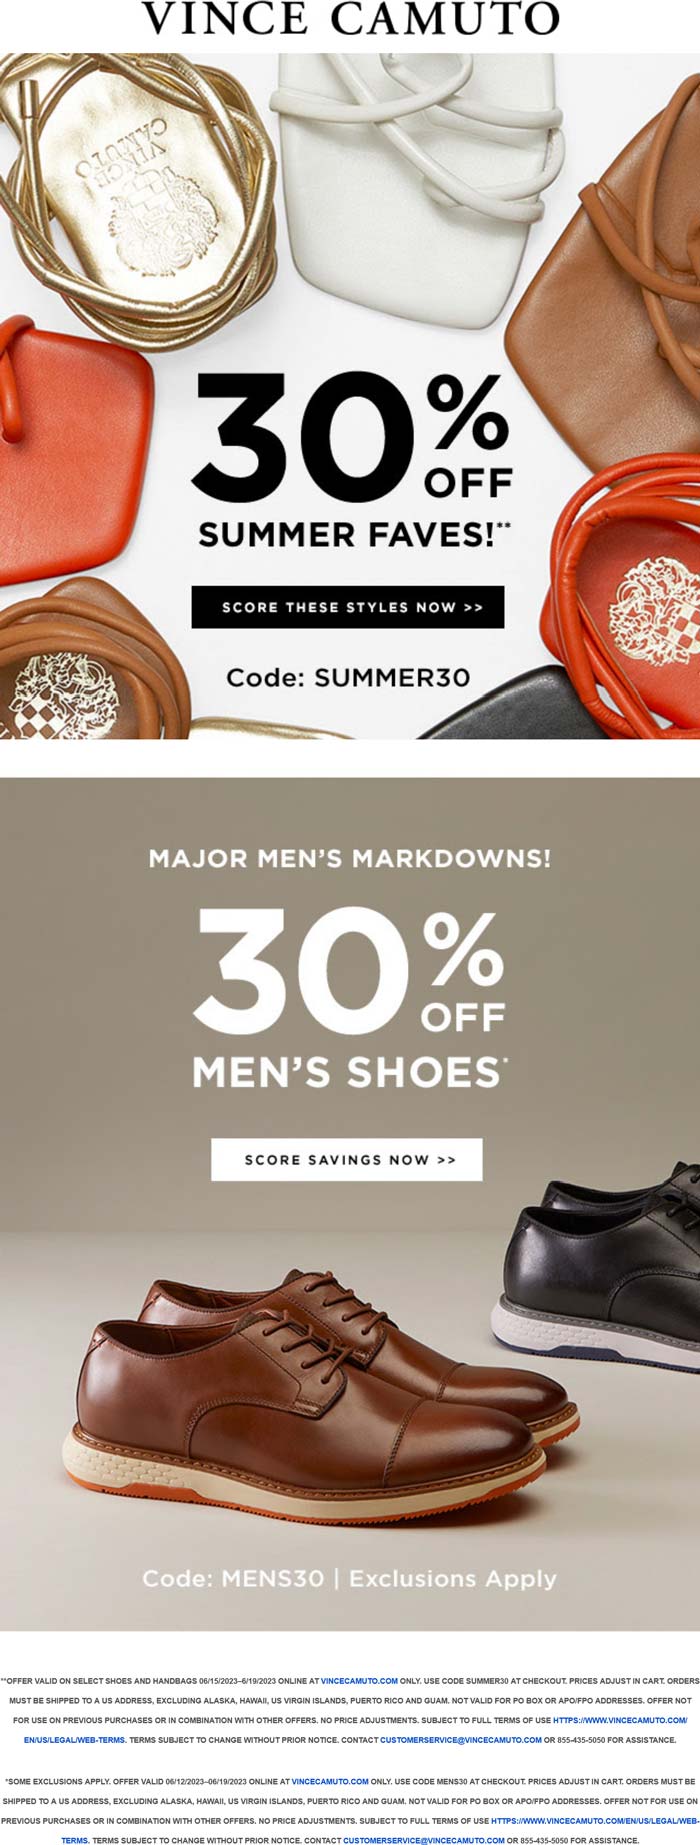 Vince Camuto stores Coupon  30% off at Vince Camuto via promo code SUMMER30 #vincecamuto 